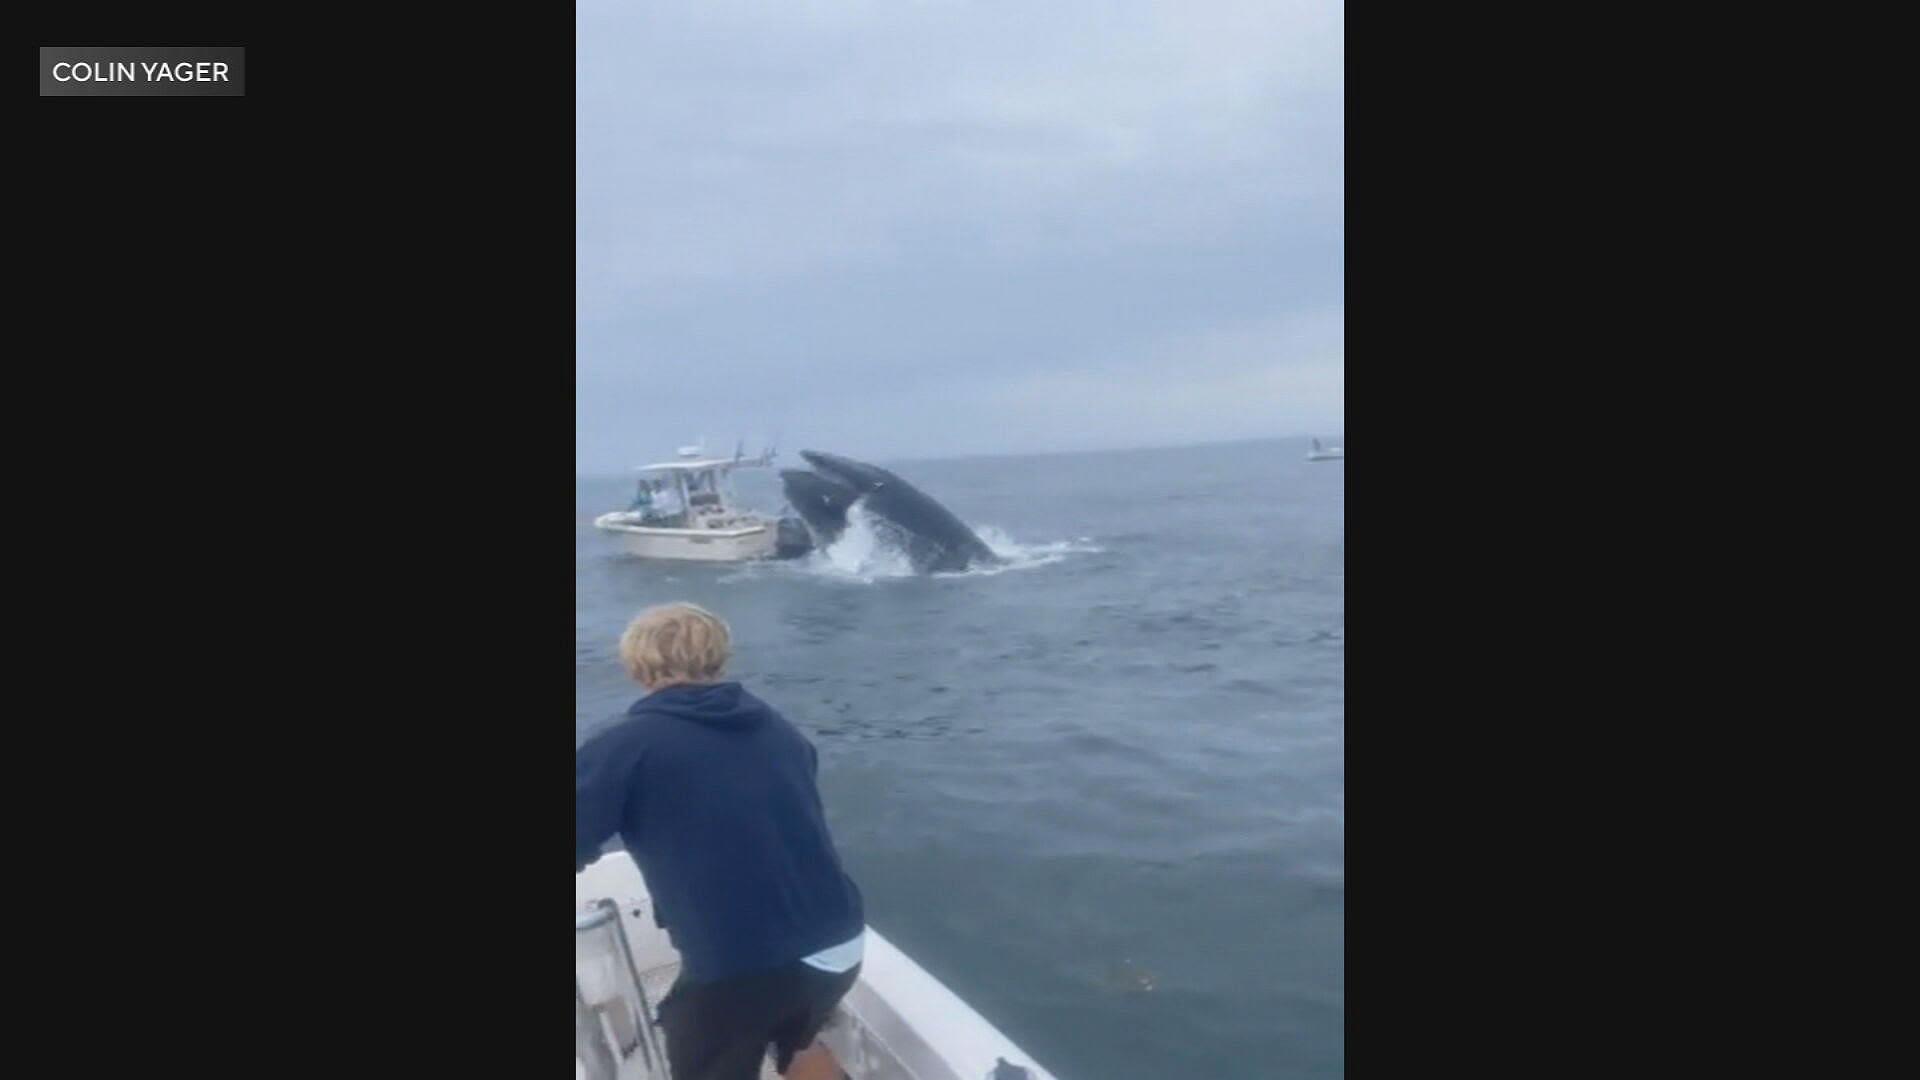 Video shows whale capsizing boat off New Hampshire coast, fishermen rescued